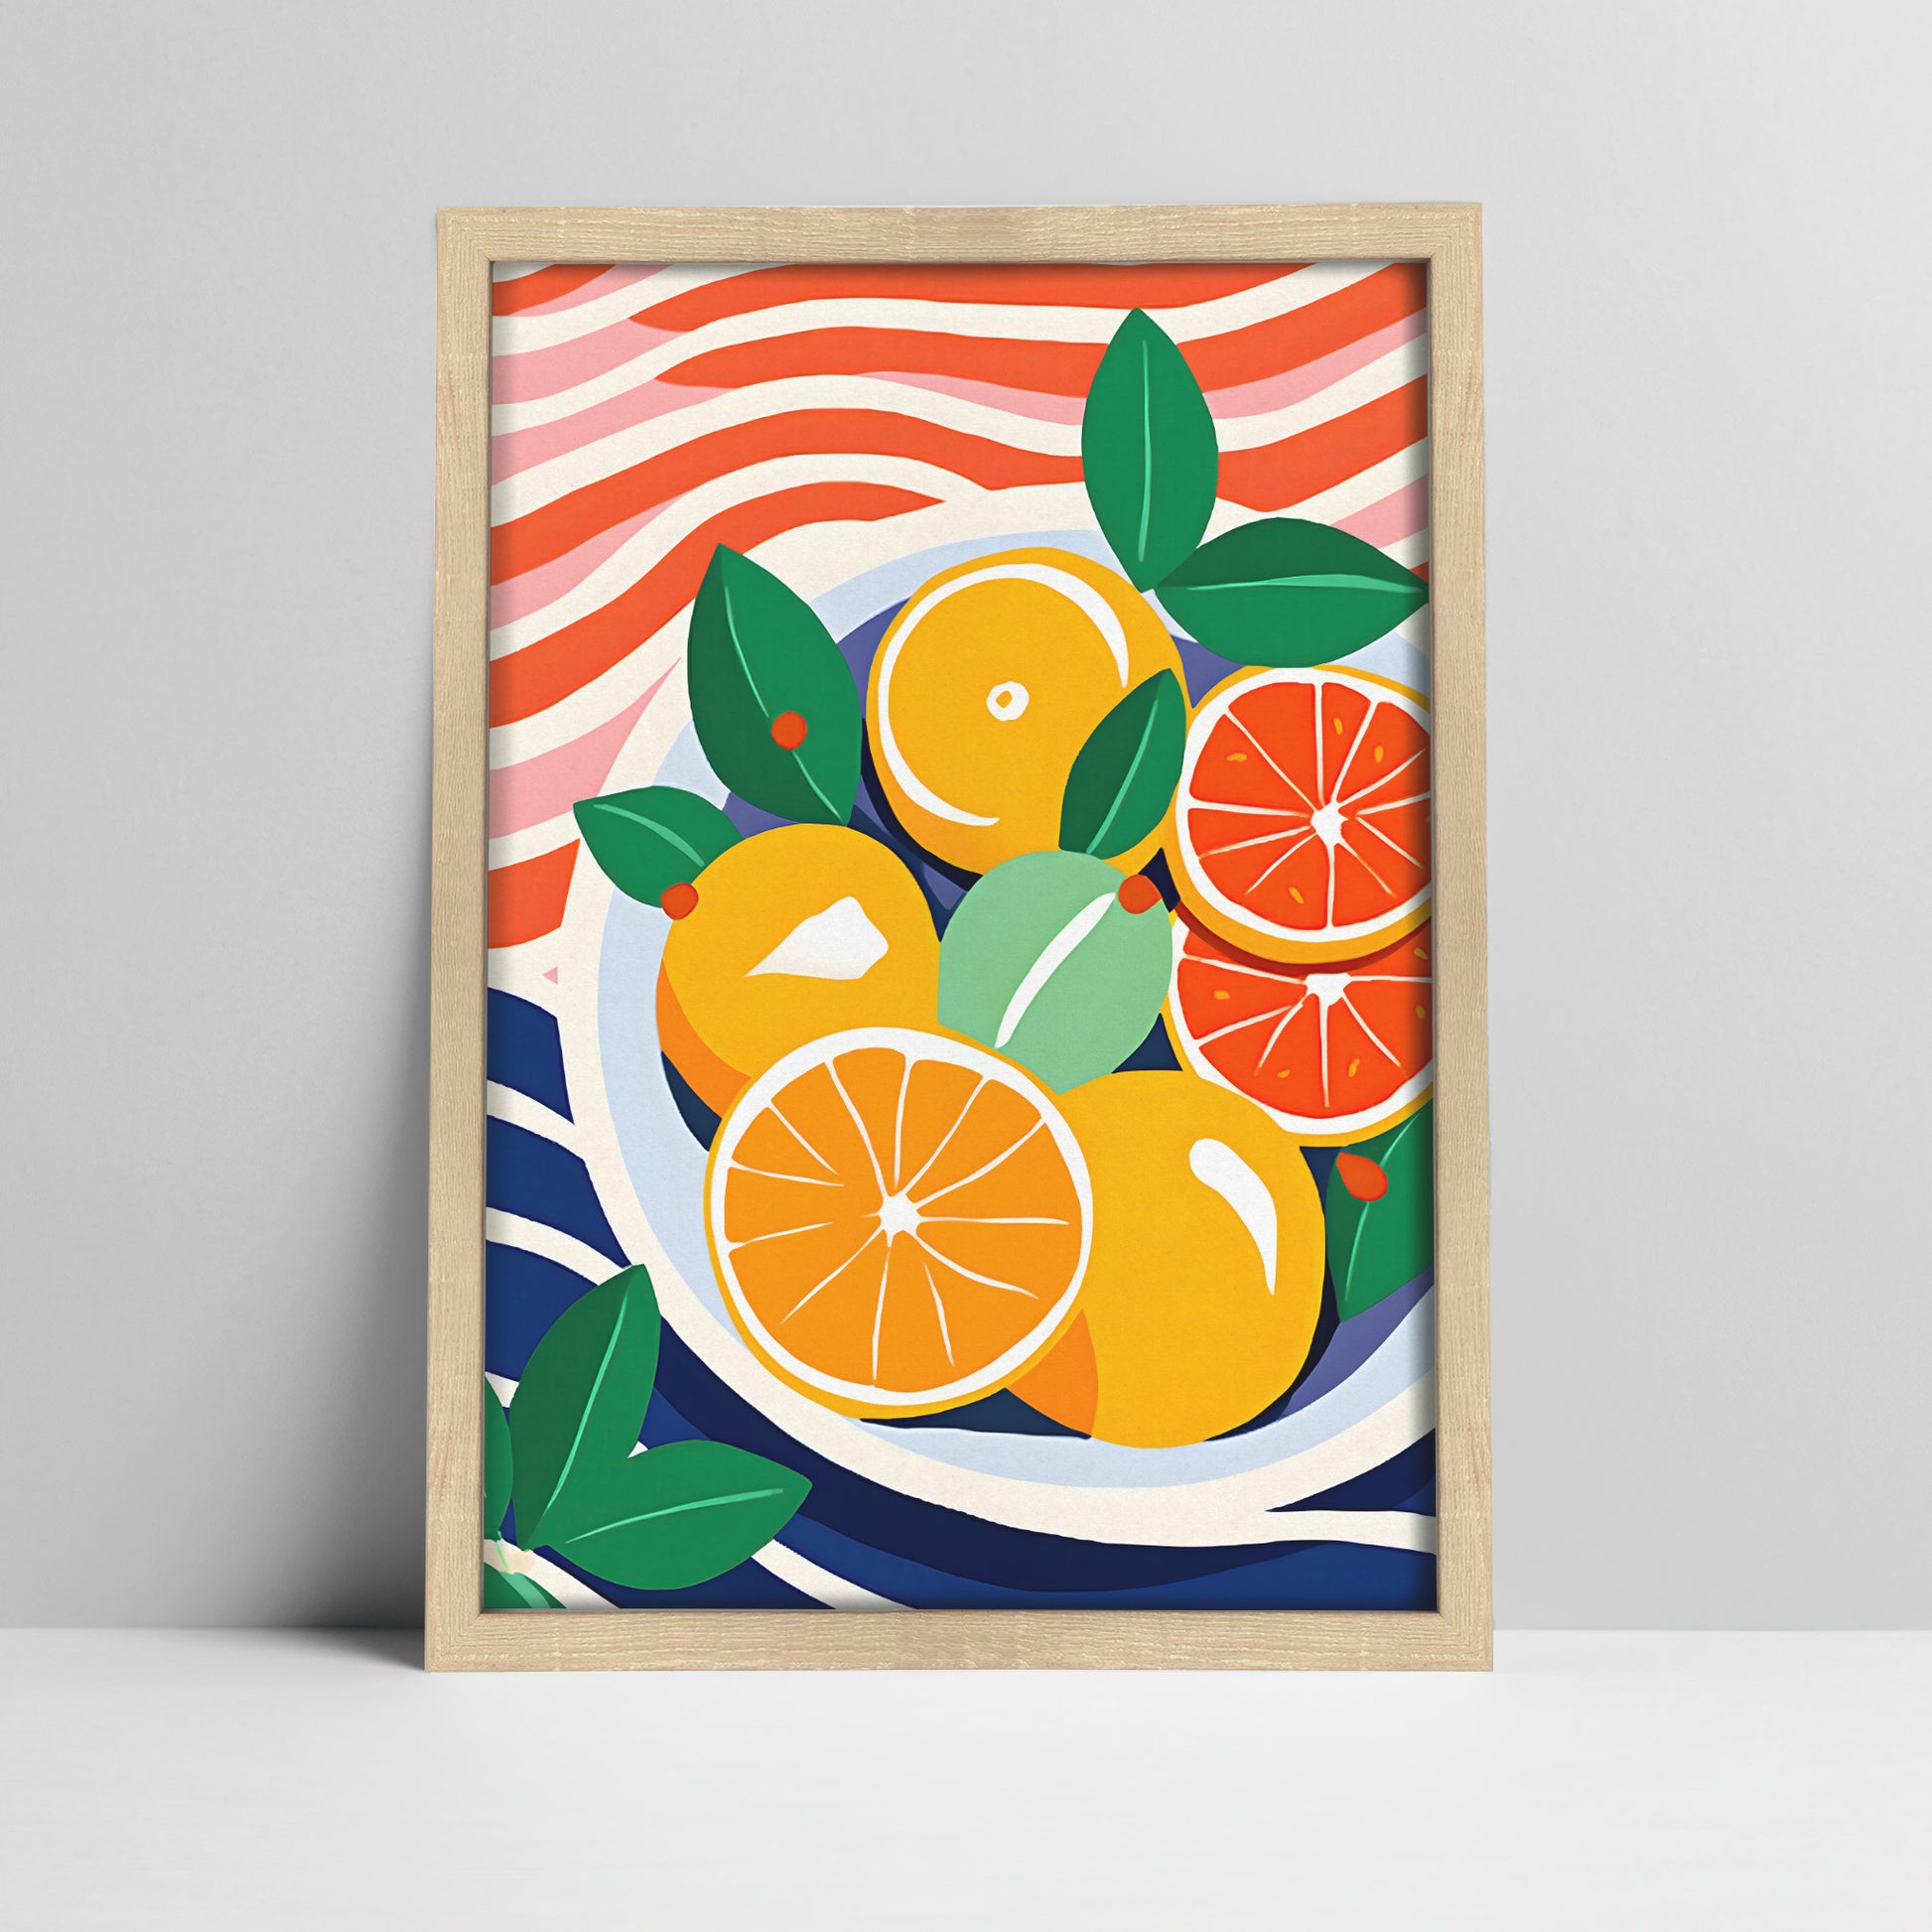 Art print of citrus fruits illustration with abstract background in a light wood frame